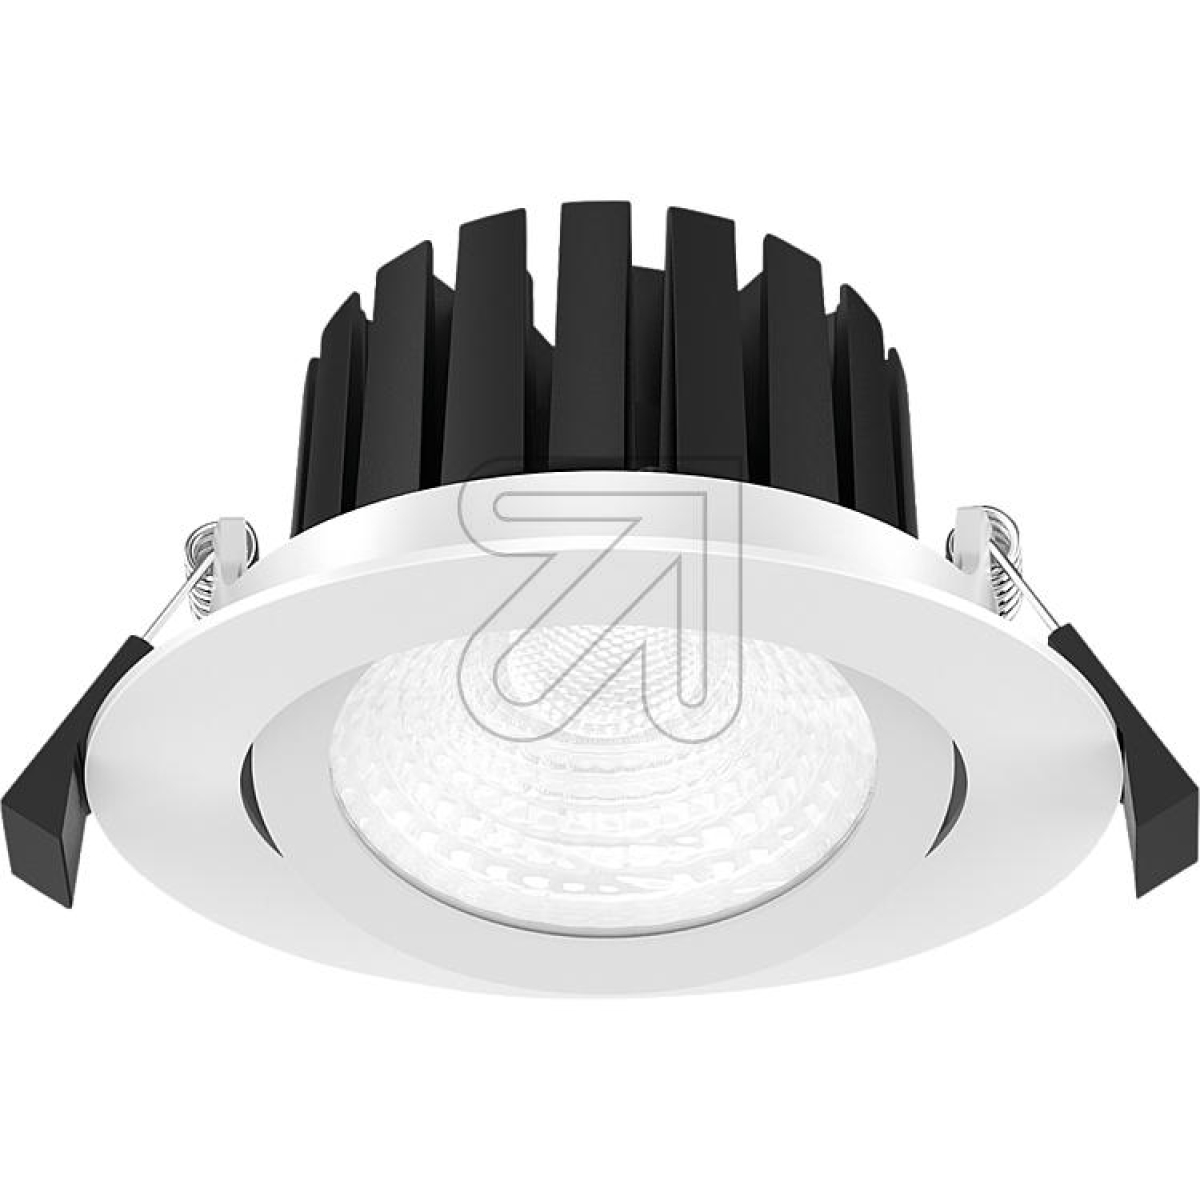 EVNLED recessed spotlight IP65, 13W 4000K, white 230V, beam angle 36°, swiveling, dimmable, P65130140Article-No: 650315